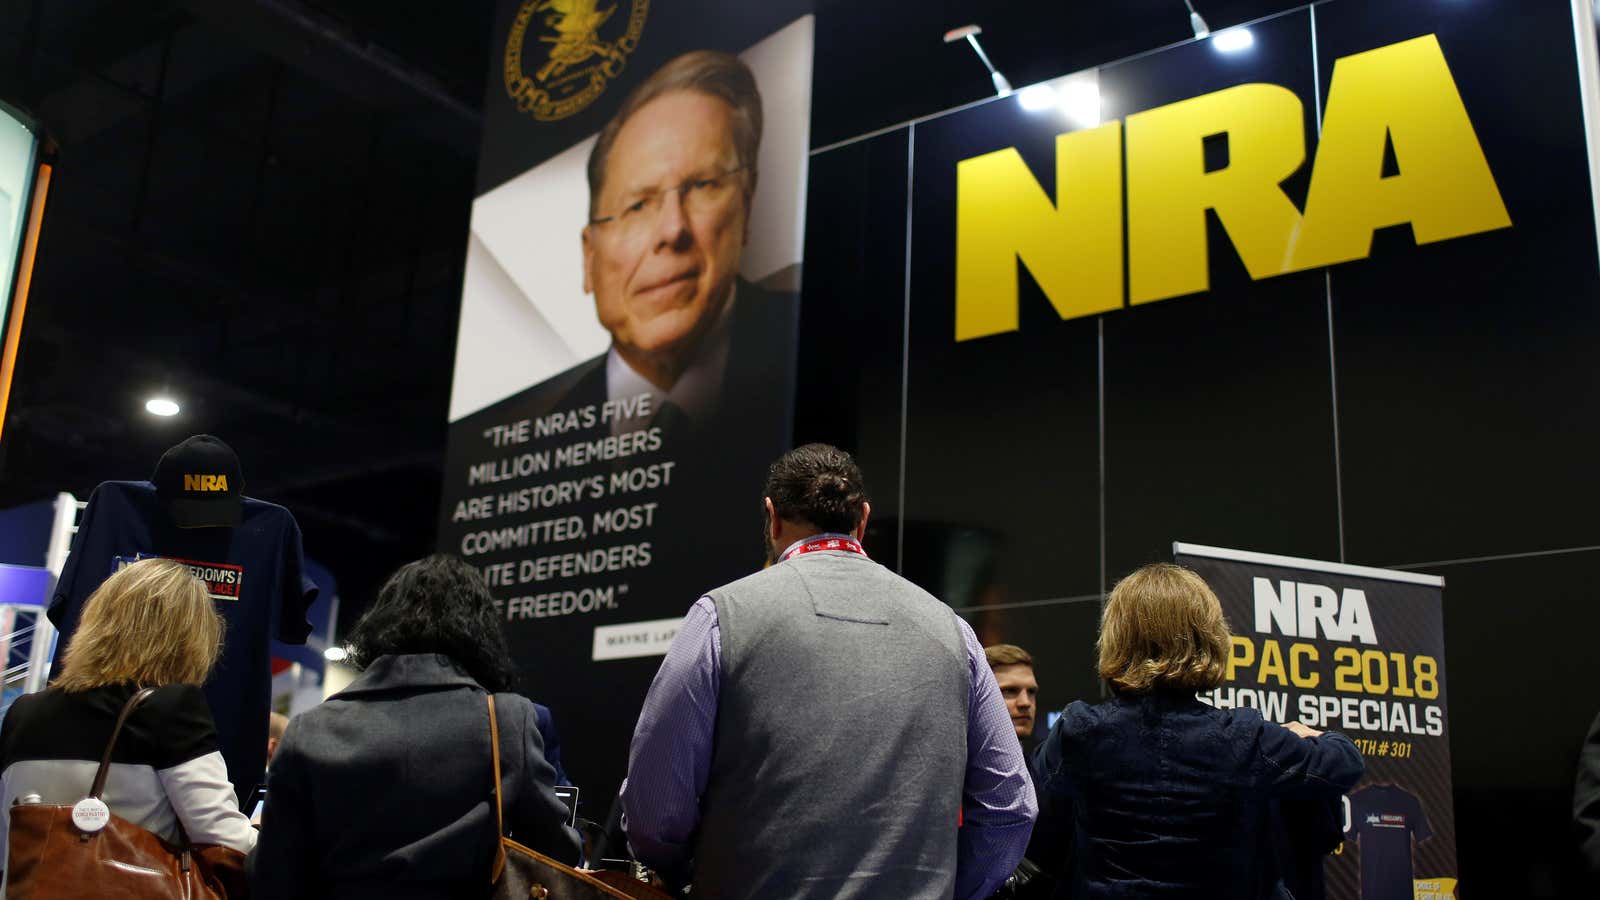 NRA Institute for Legislative Action - Thanks to you, we have over